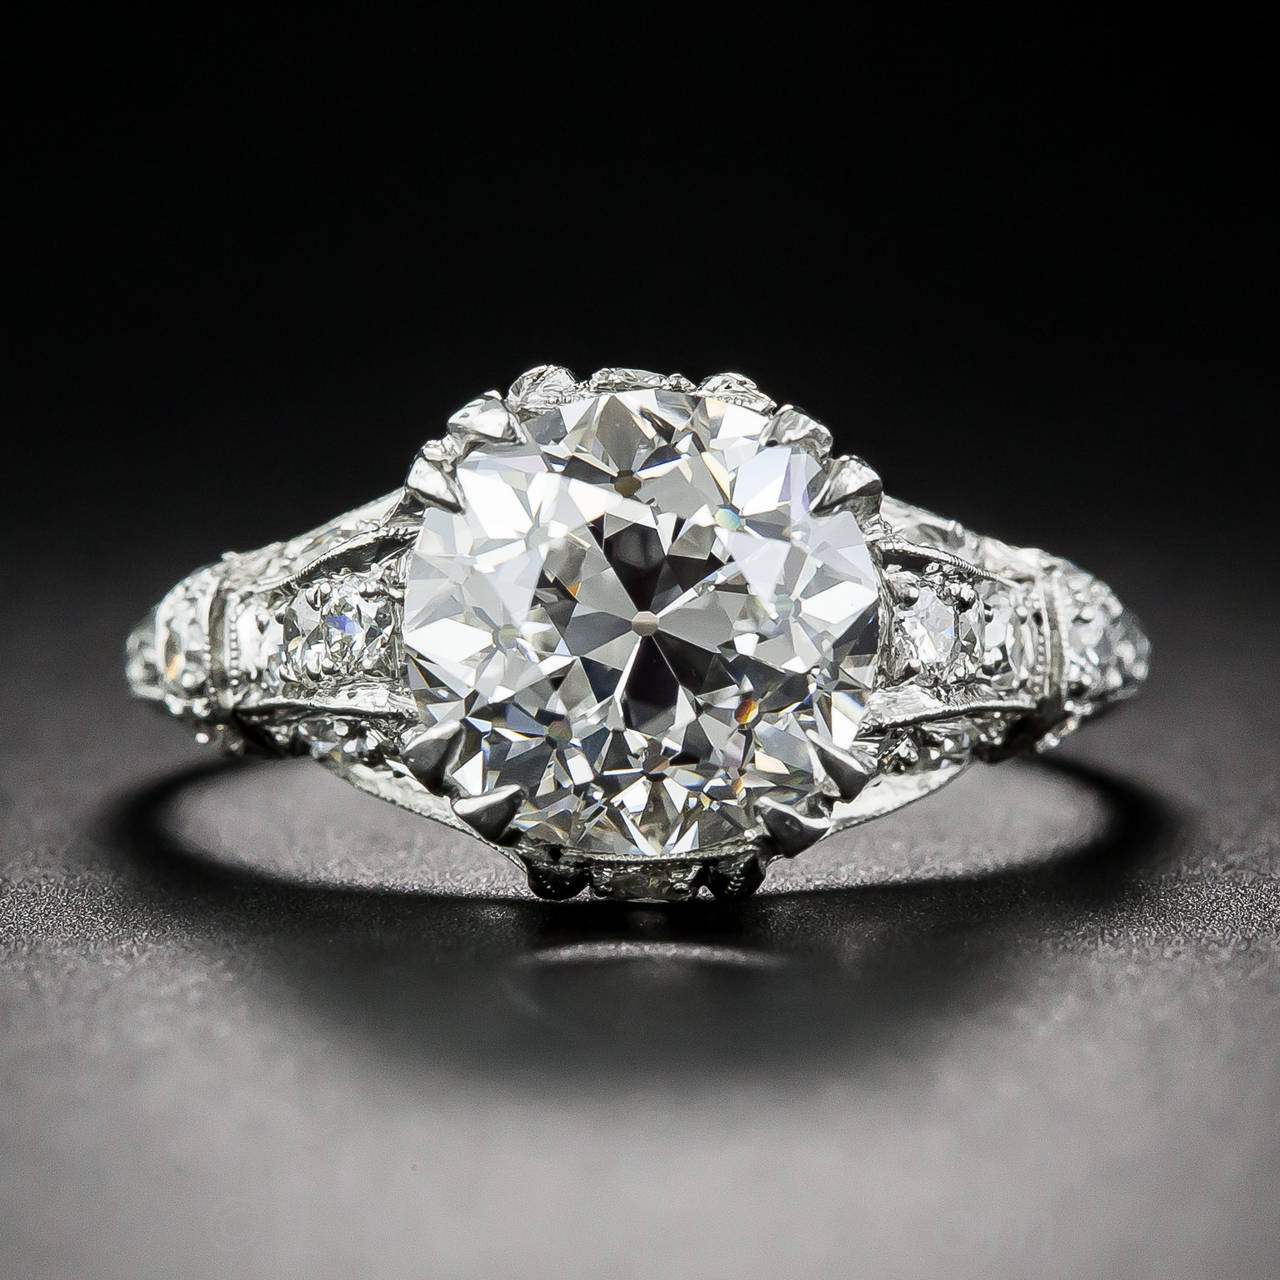 A high-color, high-clarity, high-voltage, original late-Edwardian/early-Art Deco engagement ring - circa 1920 - featuring a spectacular European-cut diamond, weighing 3.14 carats, accompanied with a GIA Diamond Grading Report stating: G color - VVS1